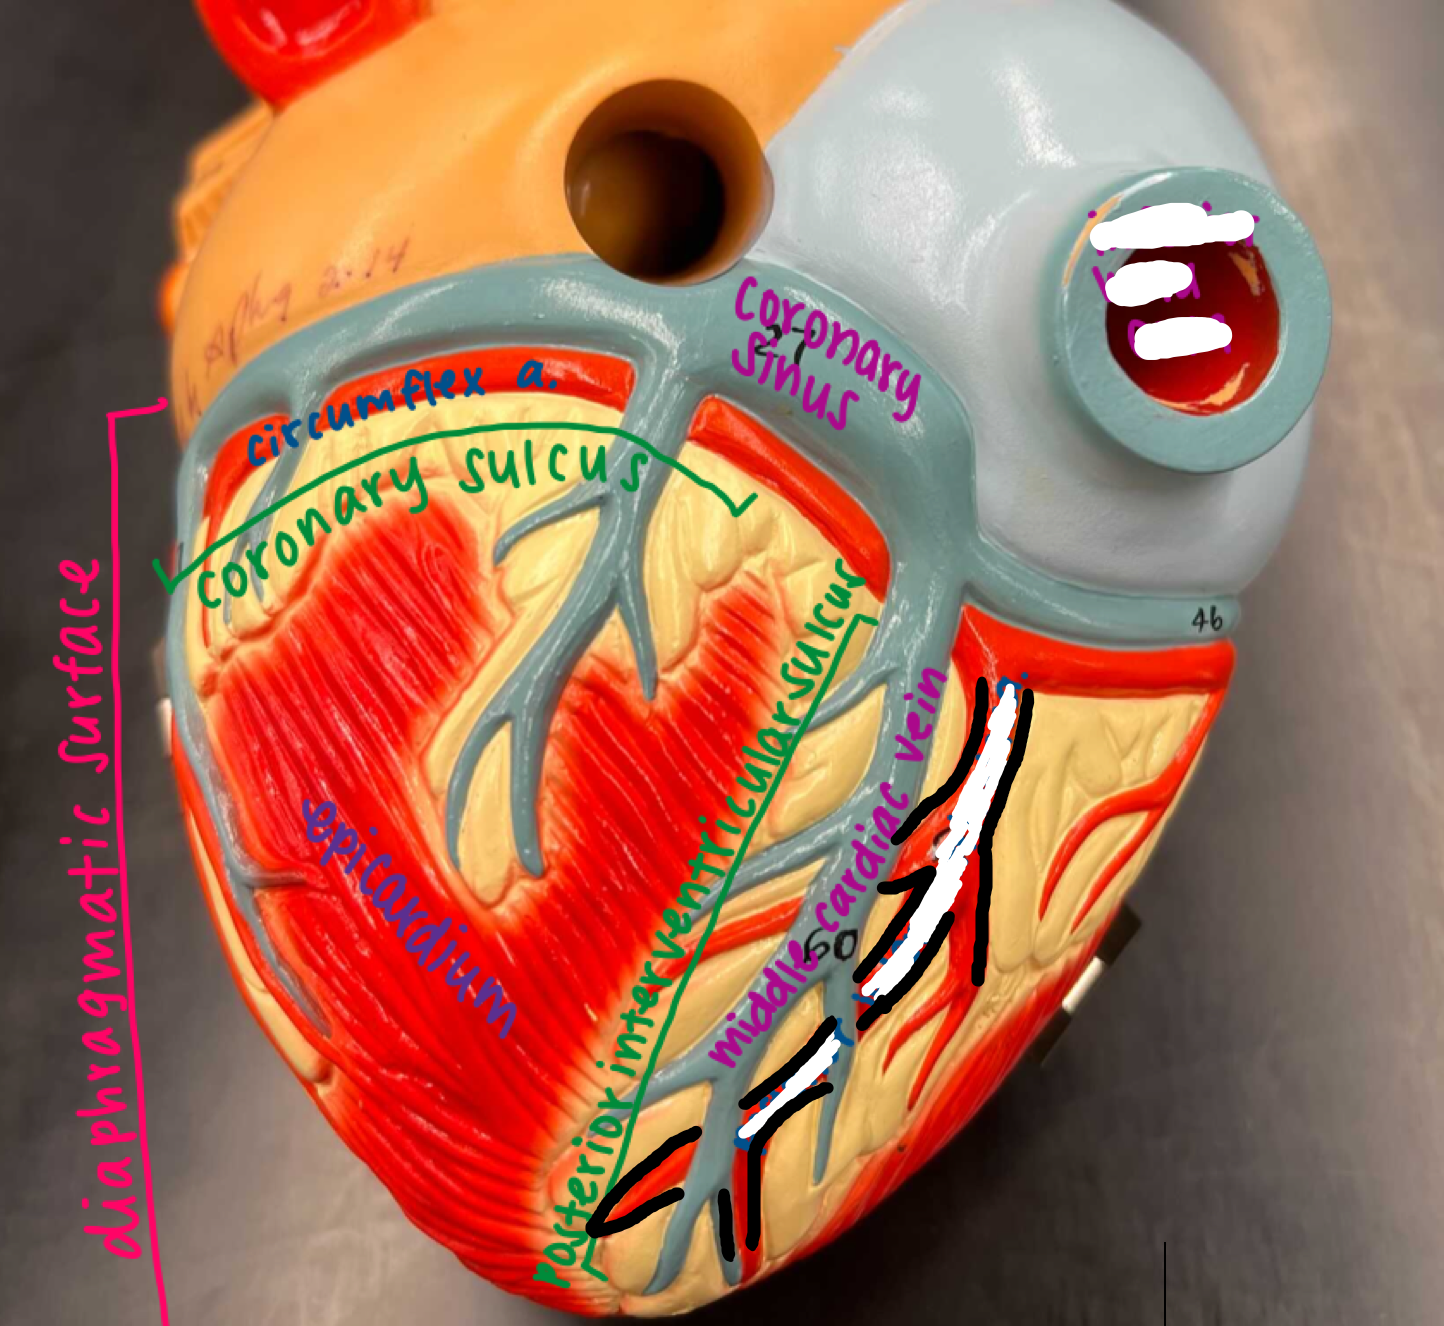 <p>On the bottom of the heart, the spiky red extension coming off the circumflex artery and just below the coronary sinus</p>